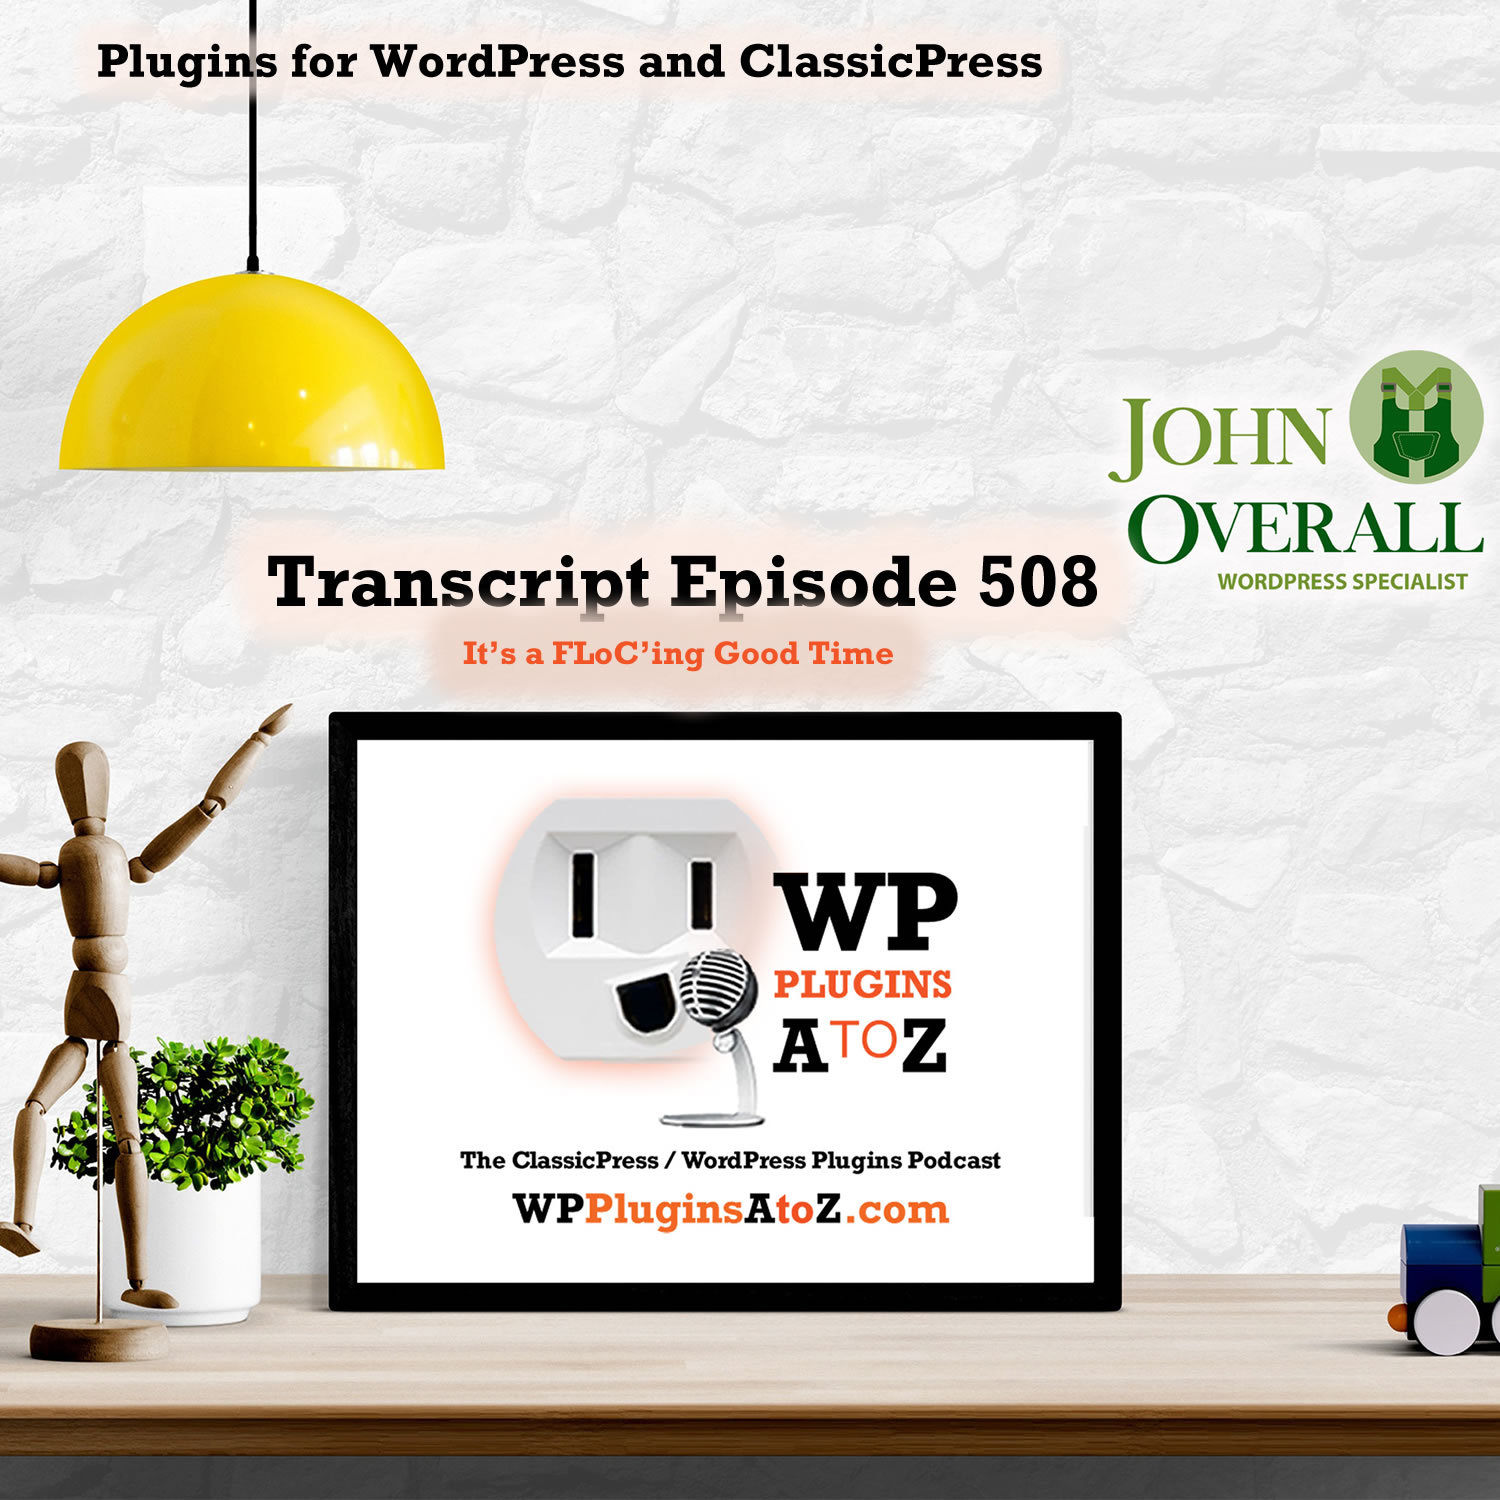 It's a FLoC'ing Good Time It's Episode 508 - We have plugins for Watching the Earth, Making Sure it Fits, Searching, Login Controls, Tracking Sales, Going FLoC'ing Crazy...., and ClassicPress Options. It's all coming up on WordPress Plugins A-Z!